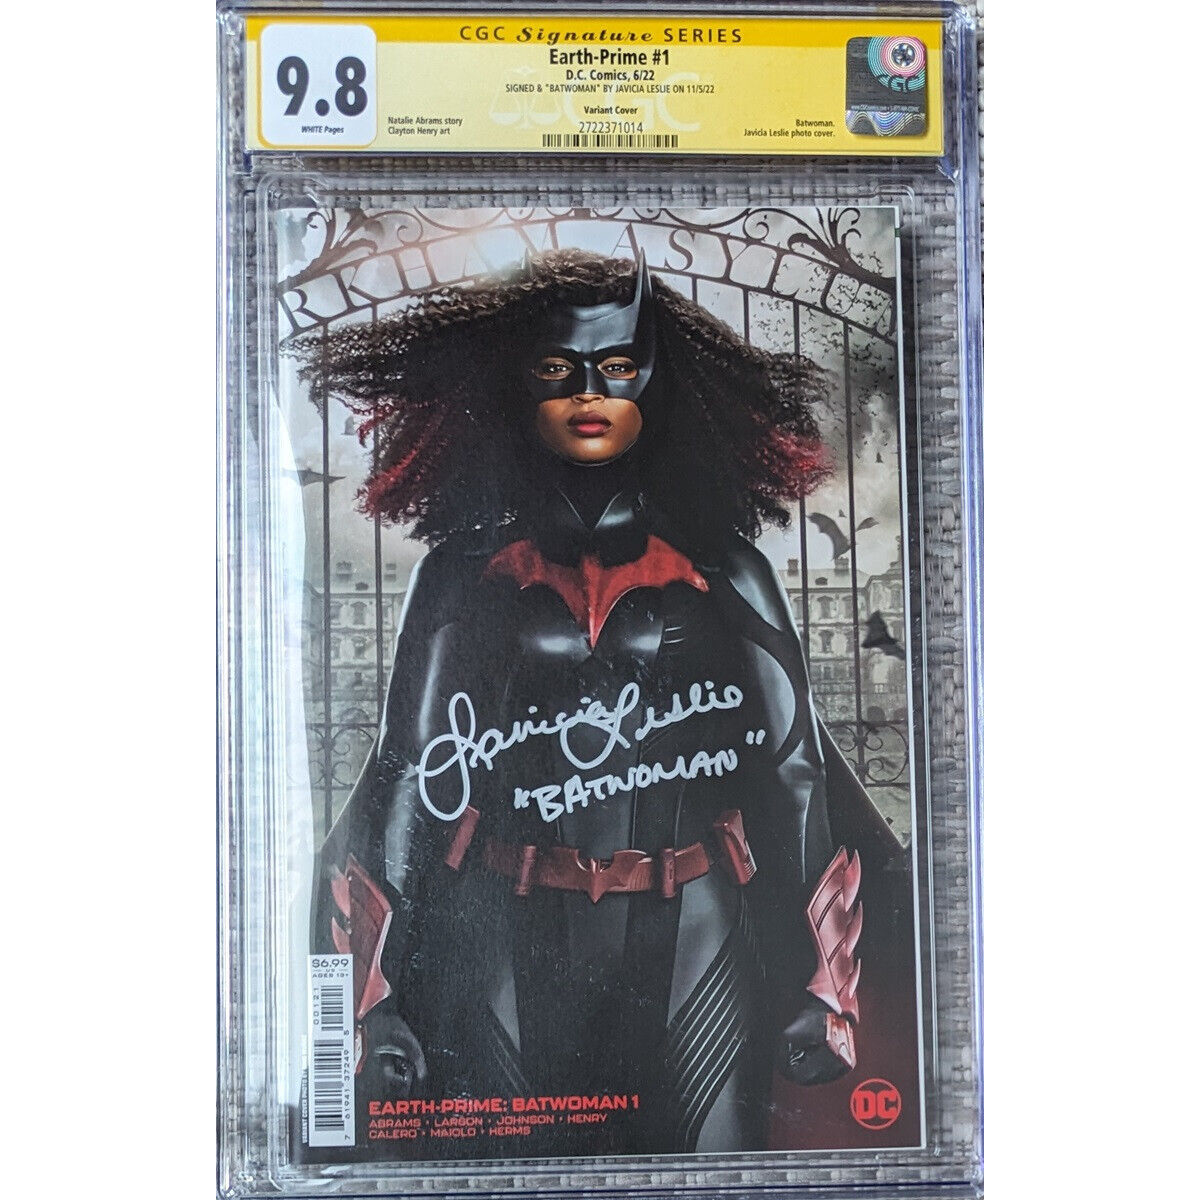 Earth_Prime #1 Batwoman photo cover__CGC 9.8 SS__Signed by Javicia Leslie